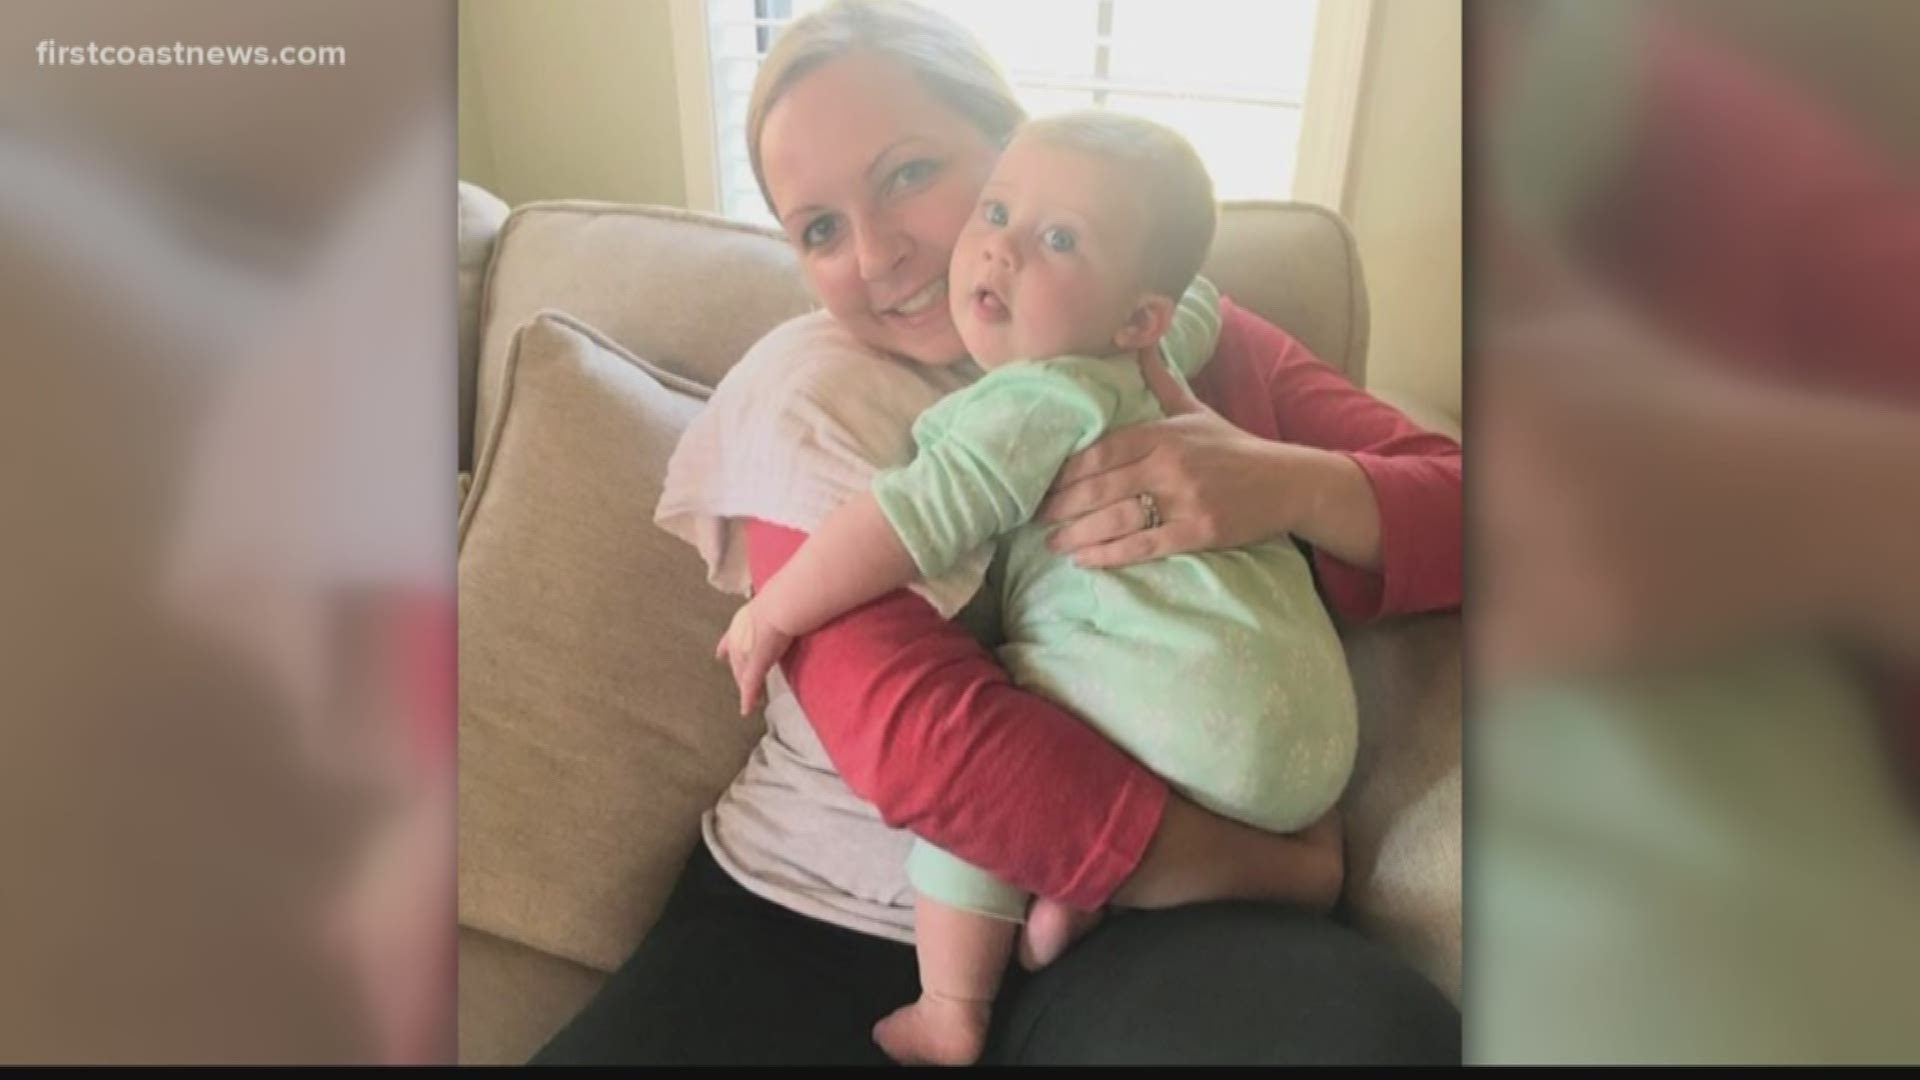 Six-month-old Maggie Hesling was the only survivor of a wrong-way crash Saturday night. Her mother's best friend asked for help keeping the little girl fed.